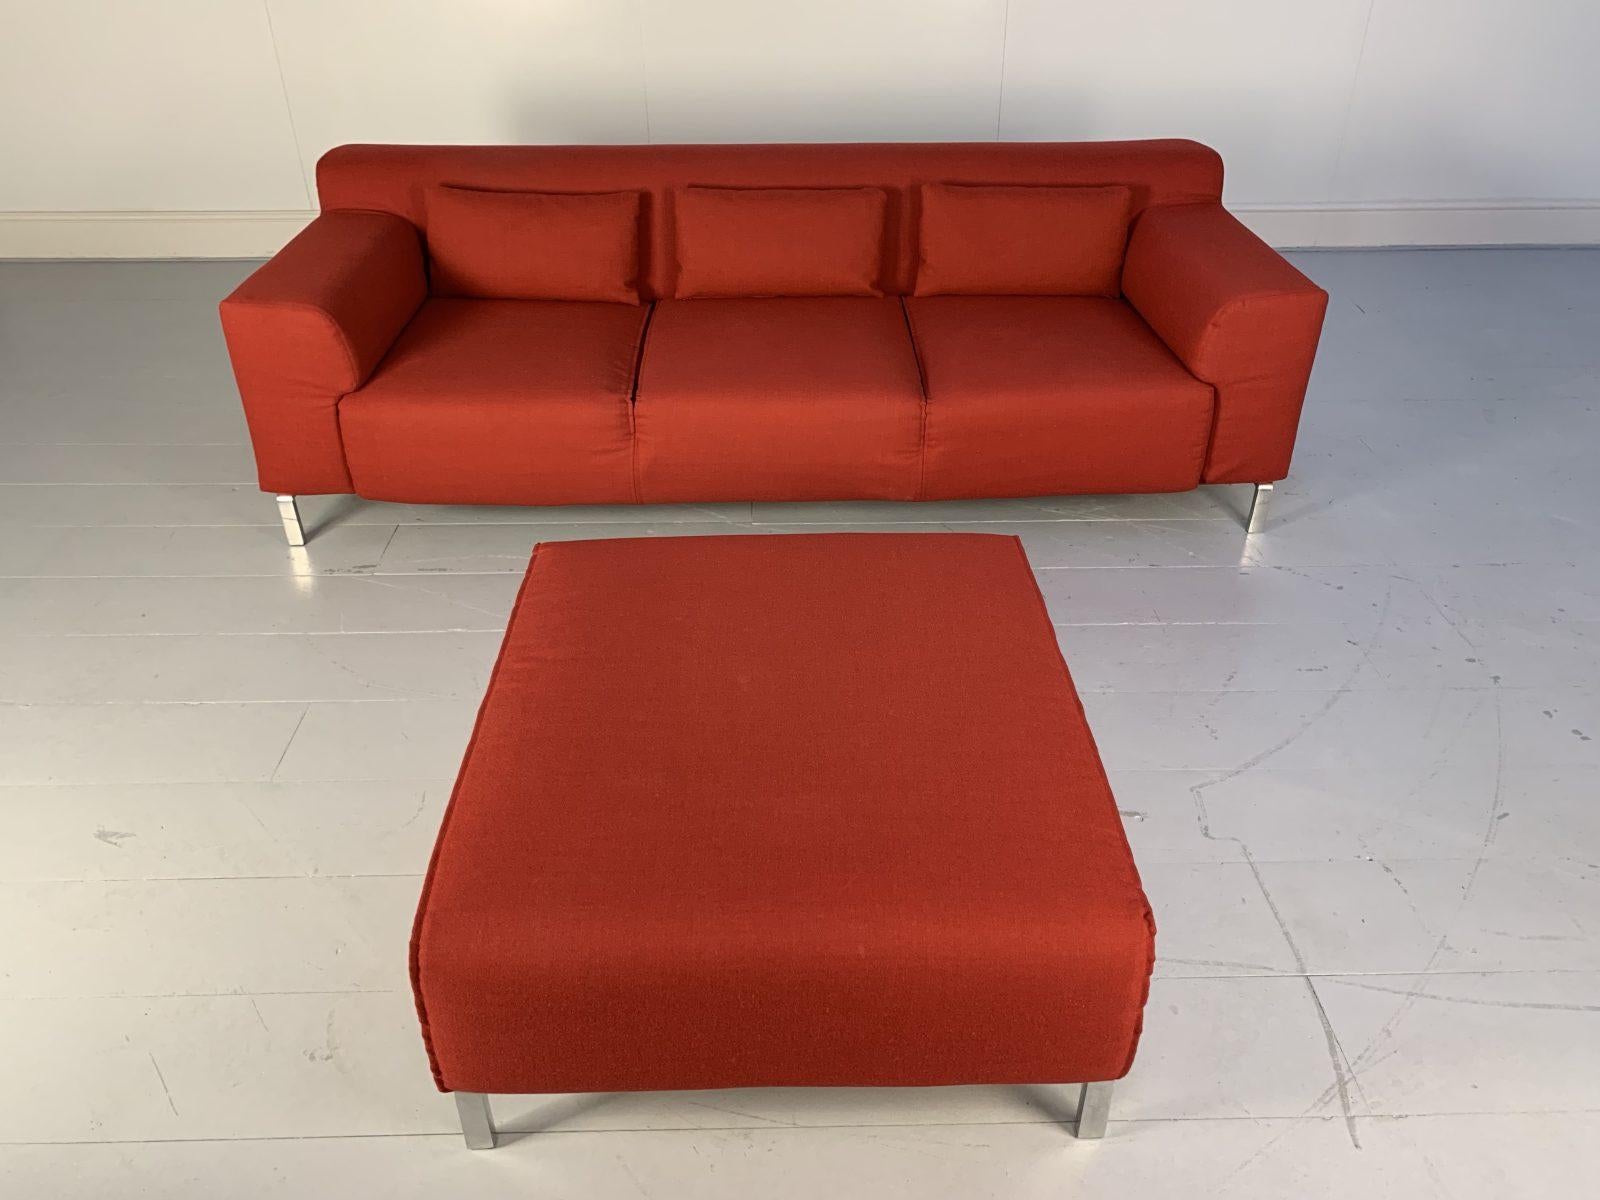 Hello Friends, and welcome to another unmissable offering from Lord Browns Furniture, the UK’s premier resource for fine Sofas and Chairs.

On offer on this occasion is a rare, immaculately presented “1323 Greg” 3-Seat Sofa and Ottoman, from the